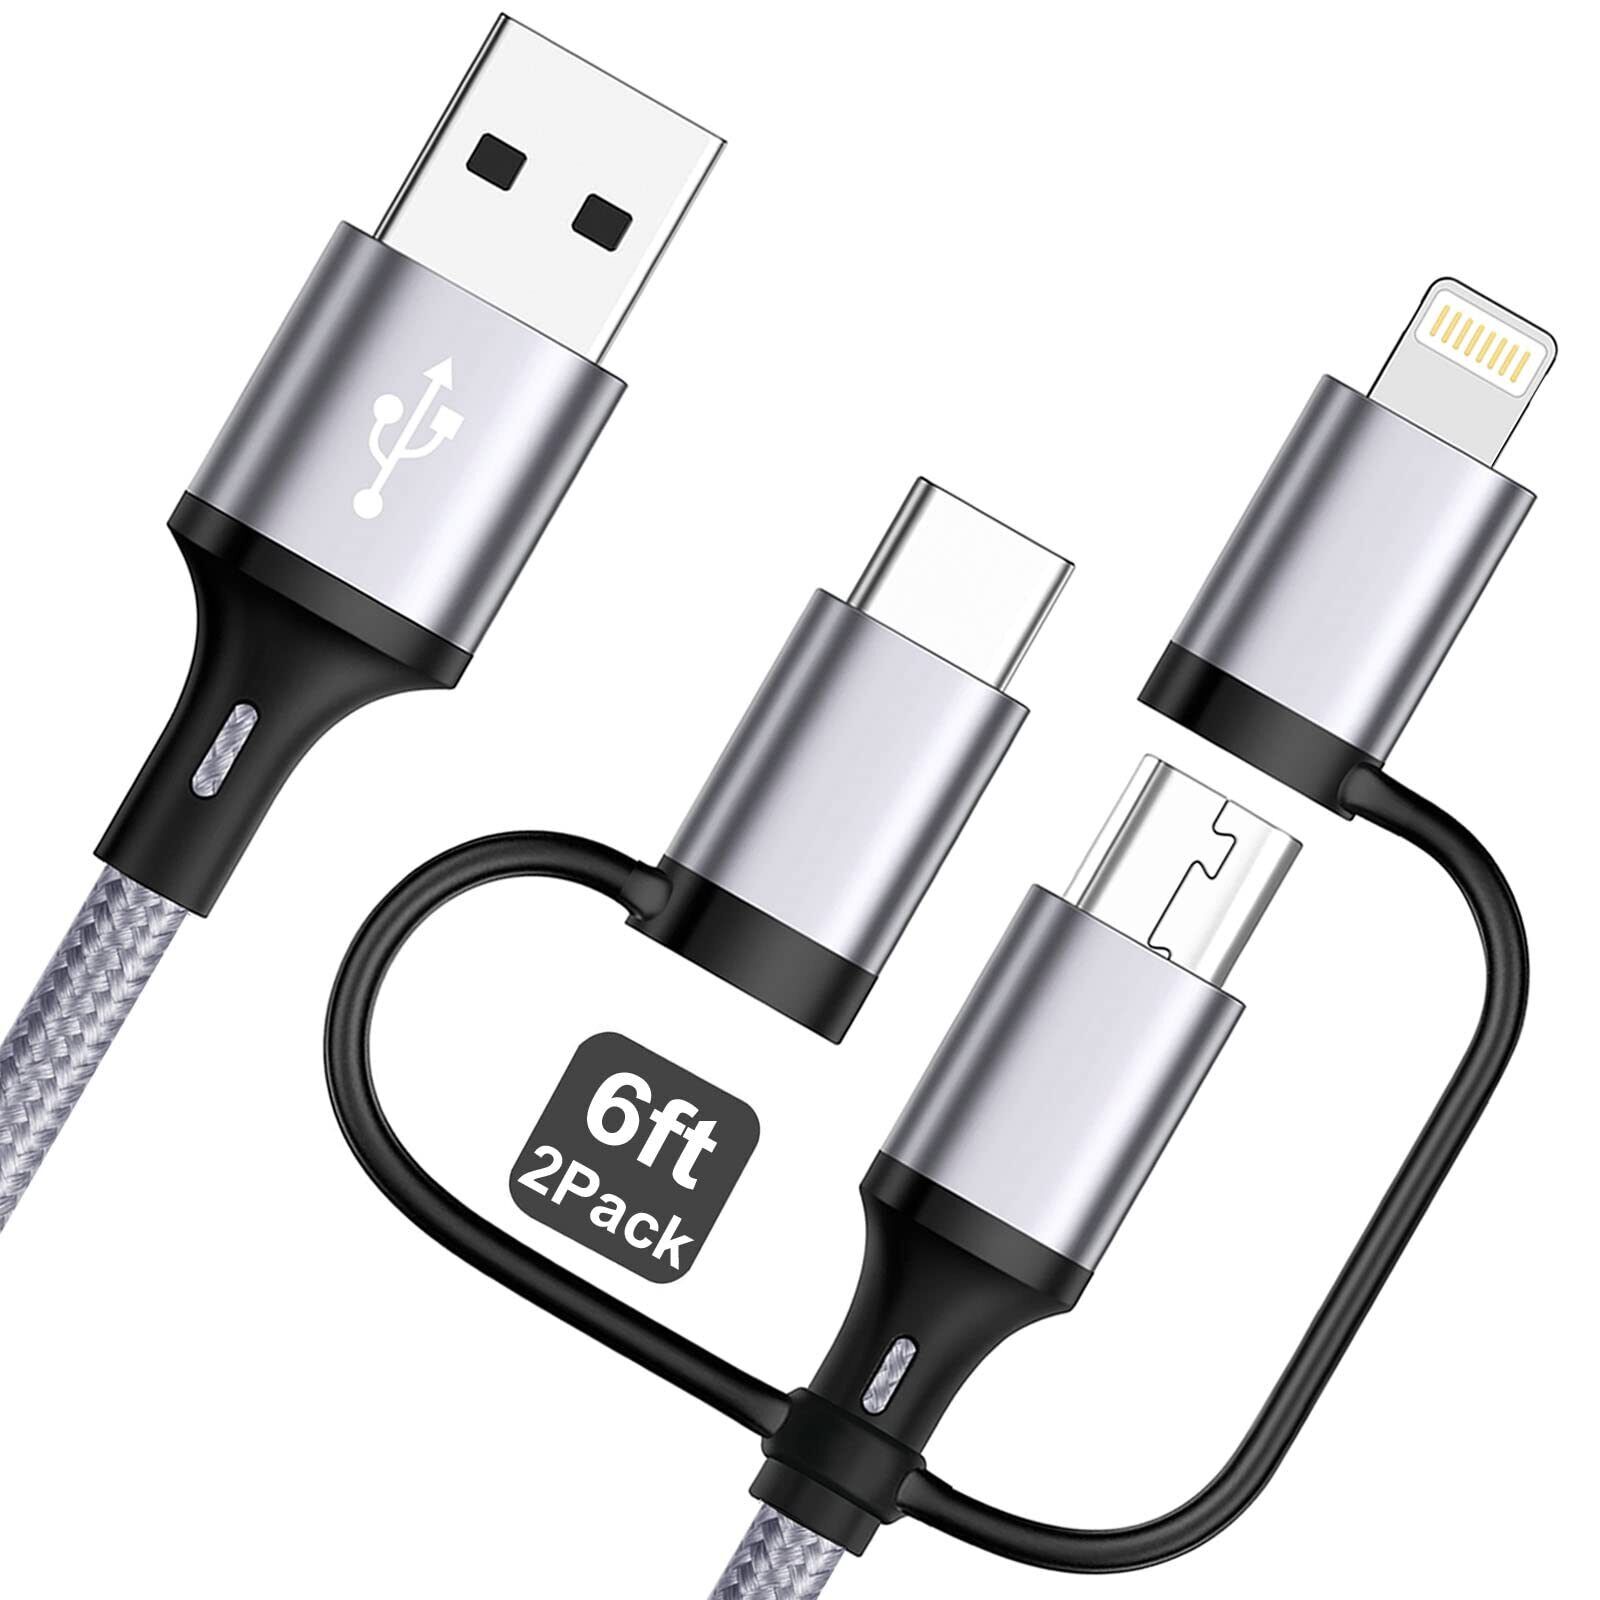  Multi Fast Charging Cable 3A [MFi Certified ] Miger Nylon Braided USB 3 in 1